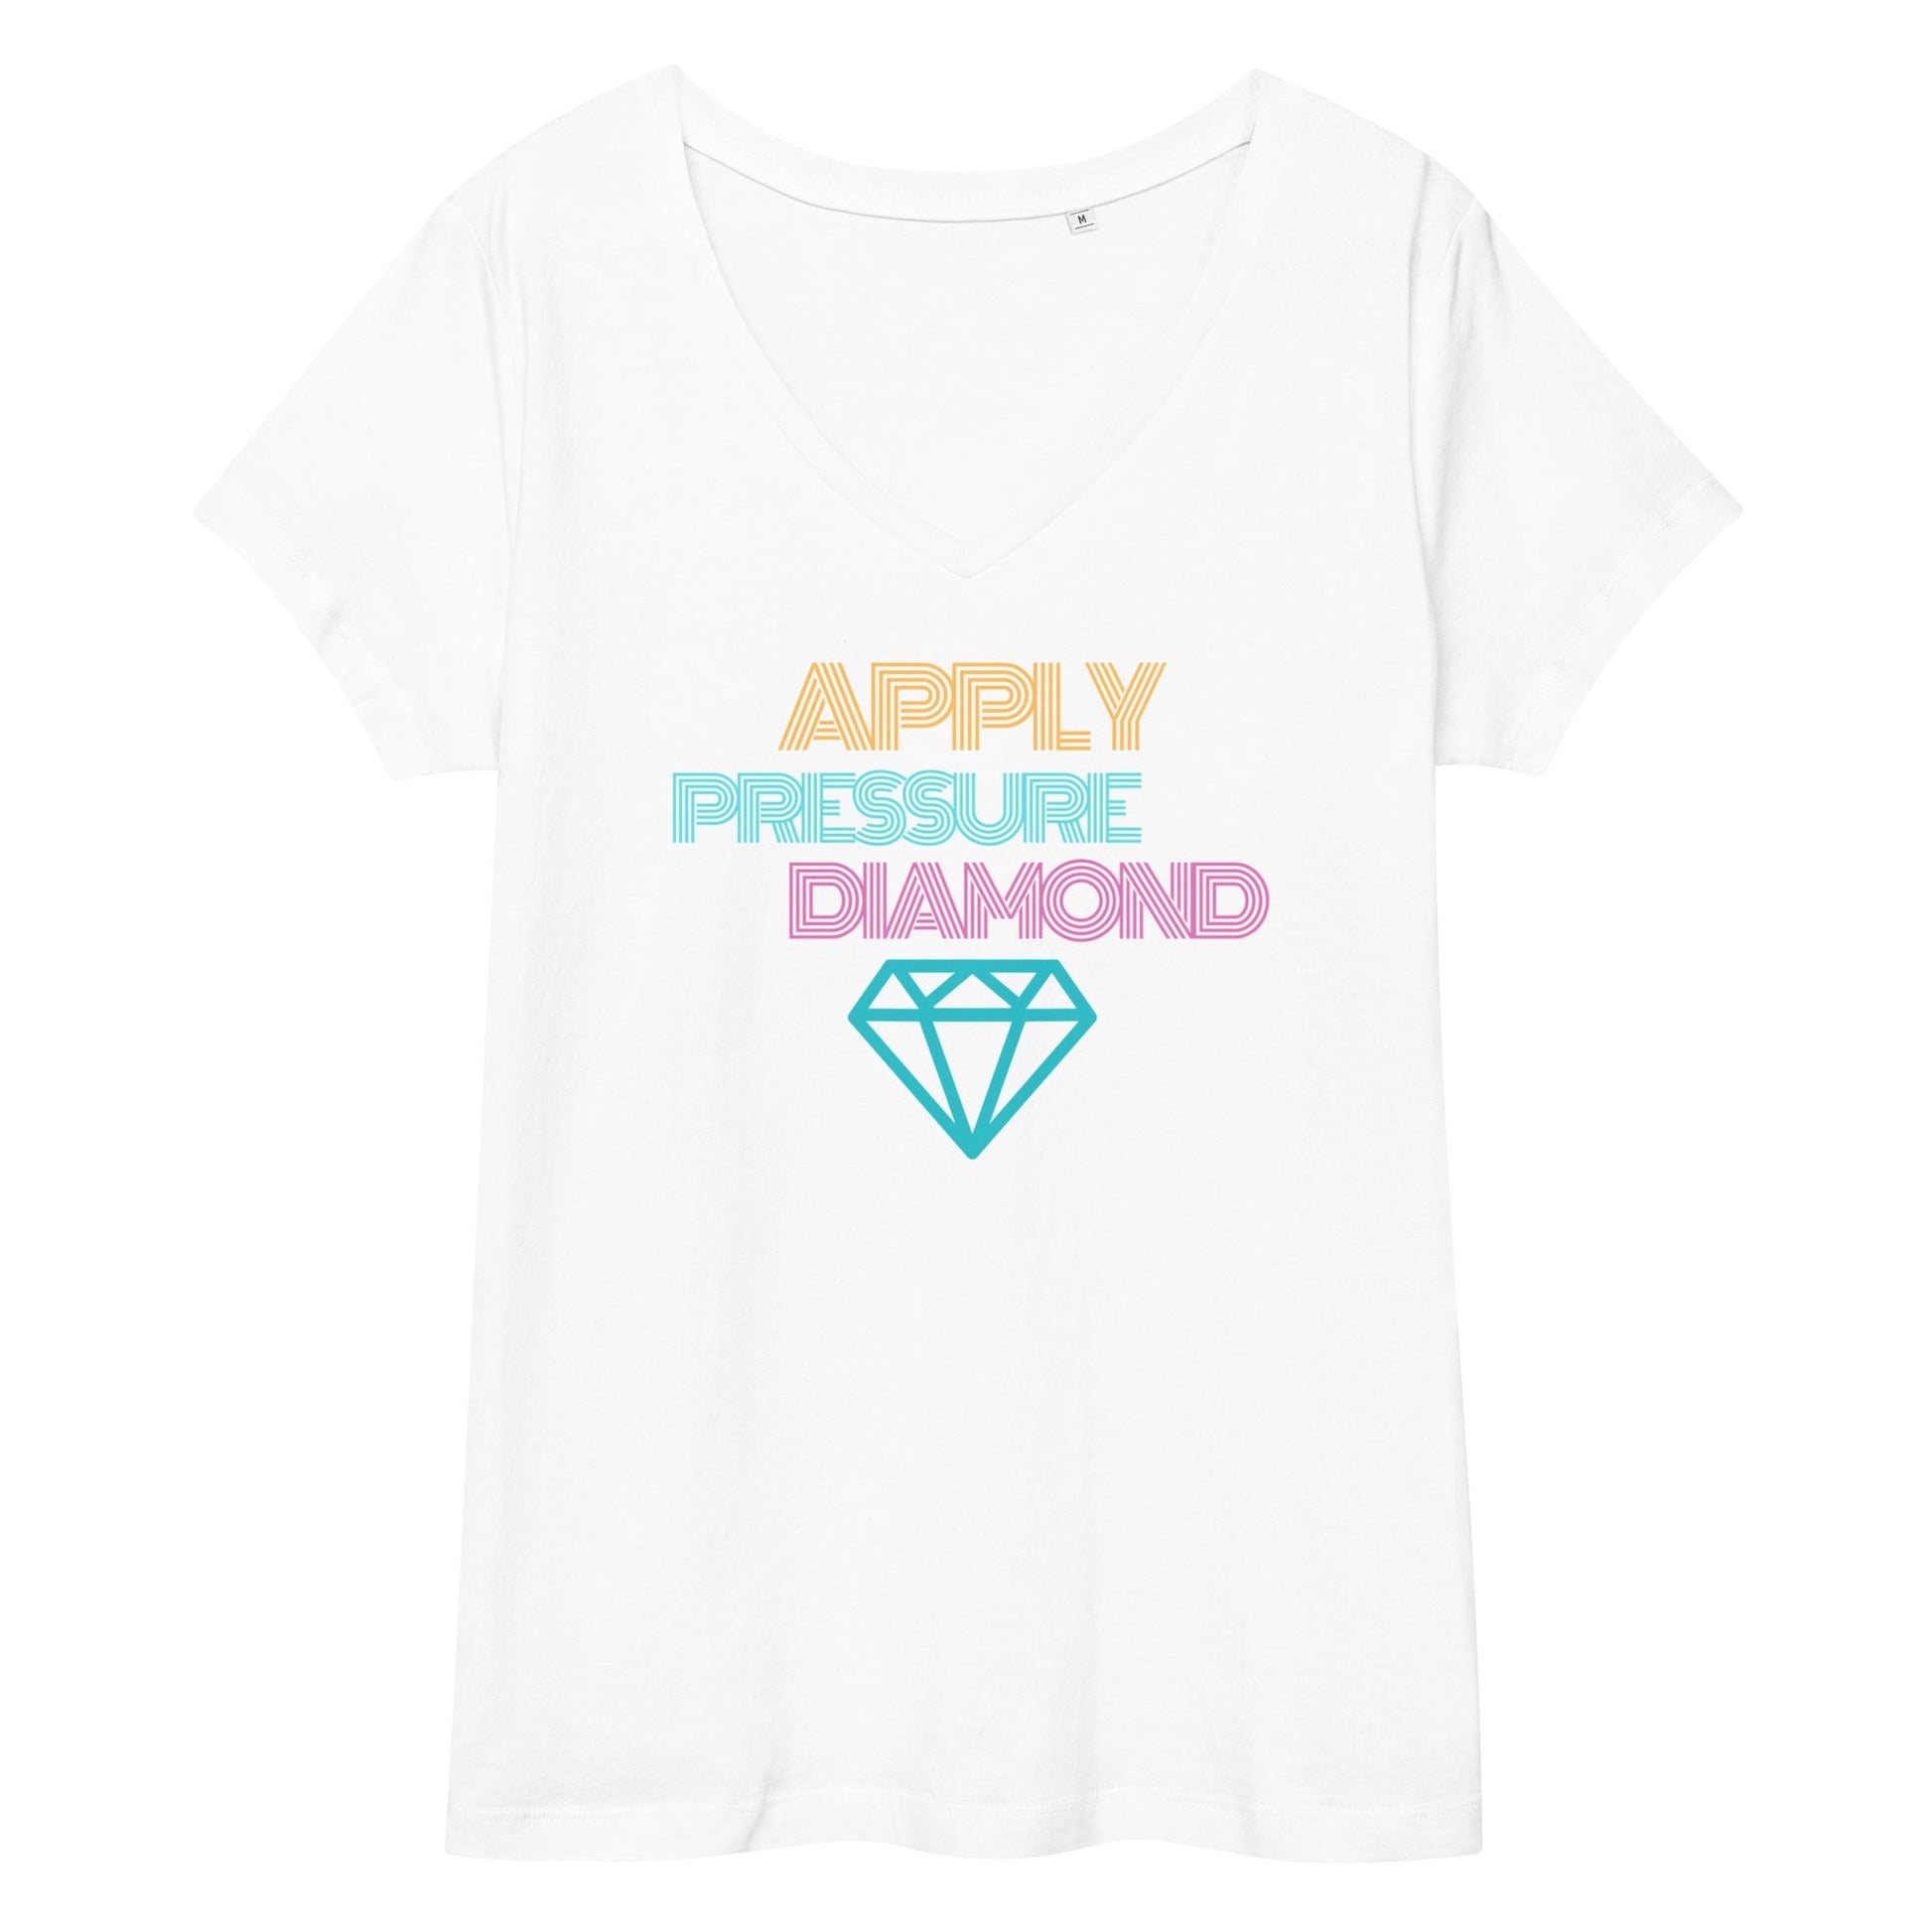 Apply Pressure Diamond Women’s fitted v-neck t-shirt - Catch This Tea Shirts